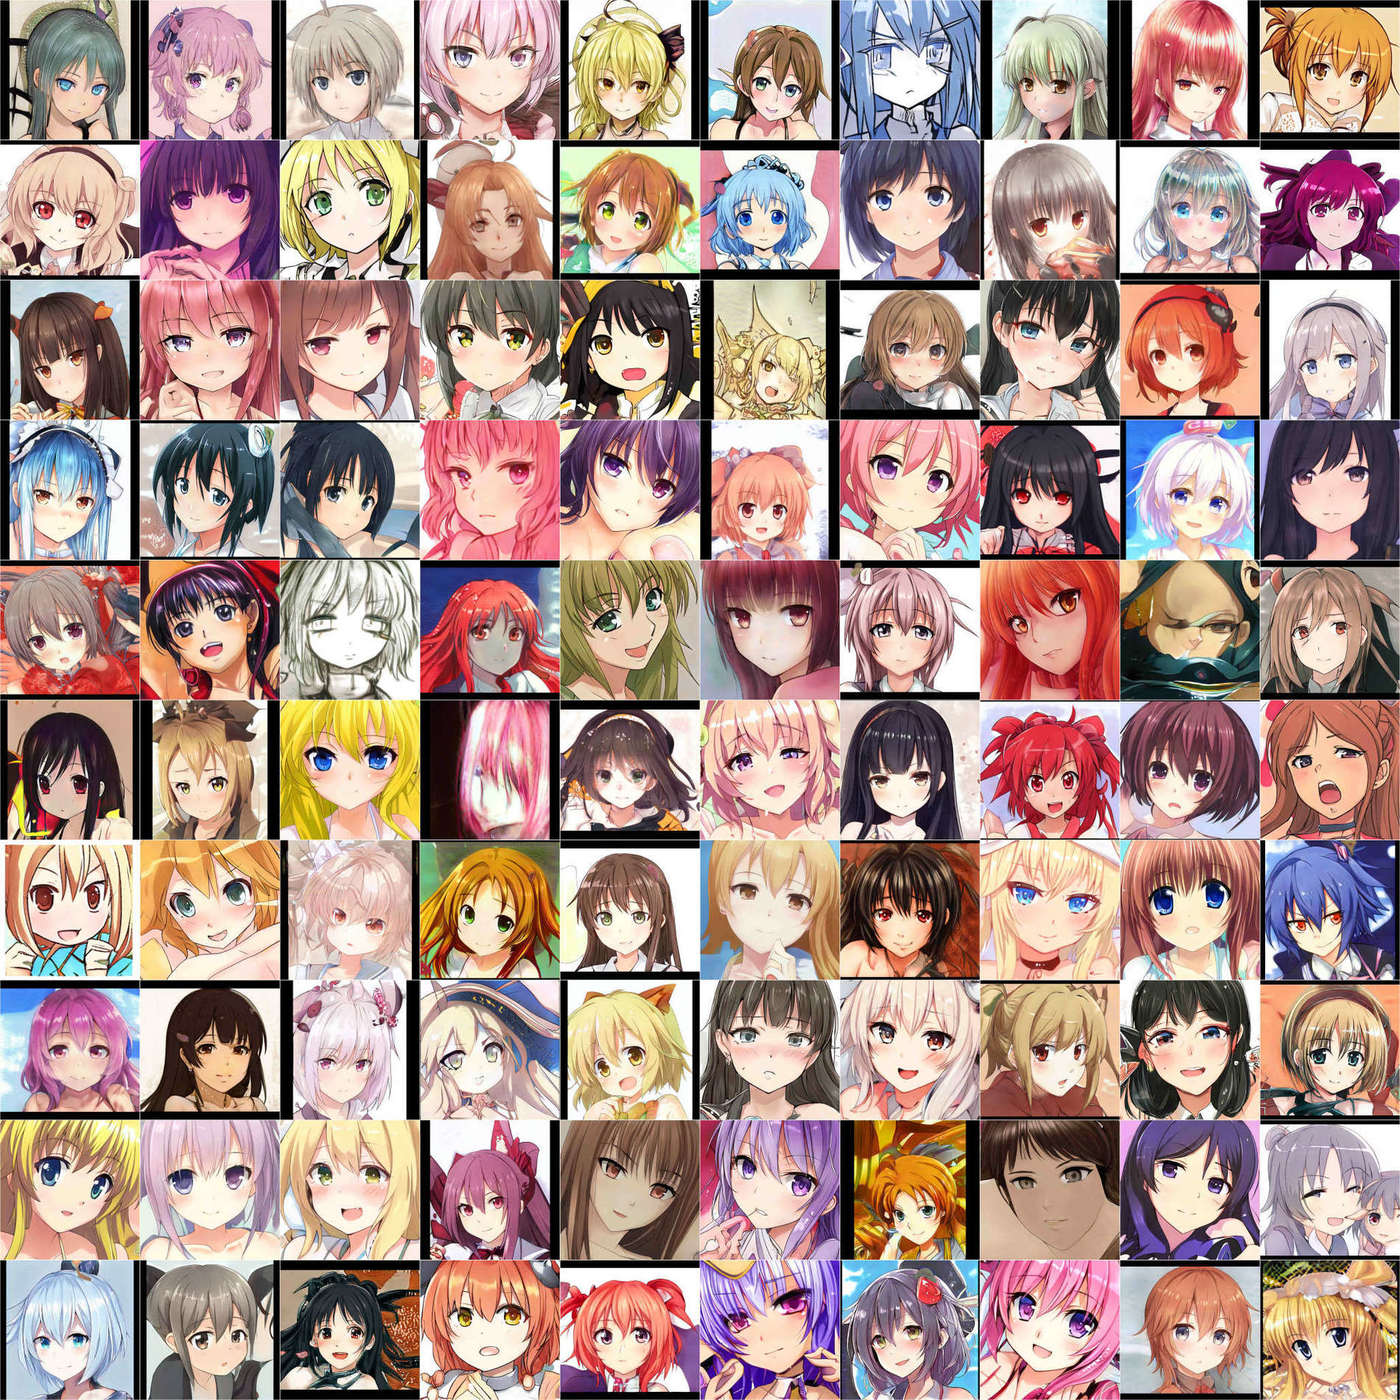 100 random sample images from the StyleGAN 2 anime portrait faces in TWDNEv3, arranged in a 10×10 grid.